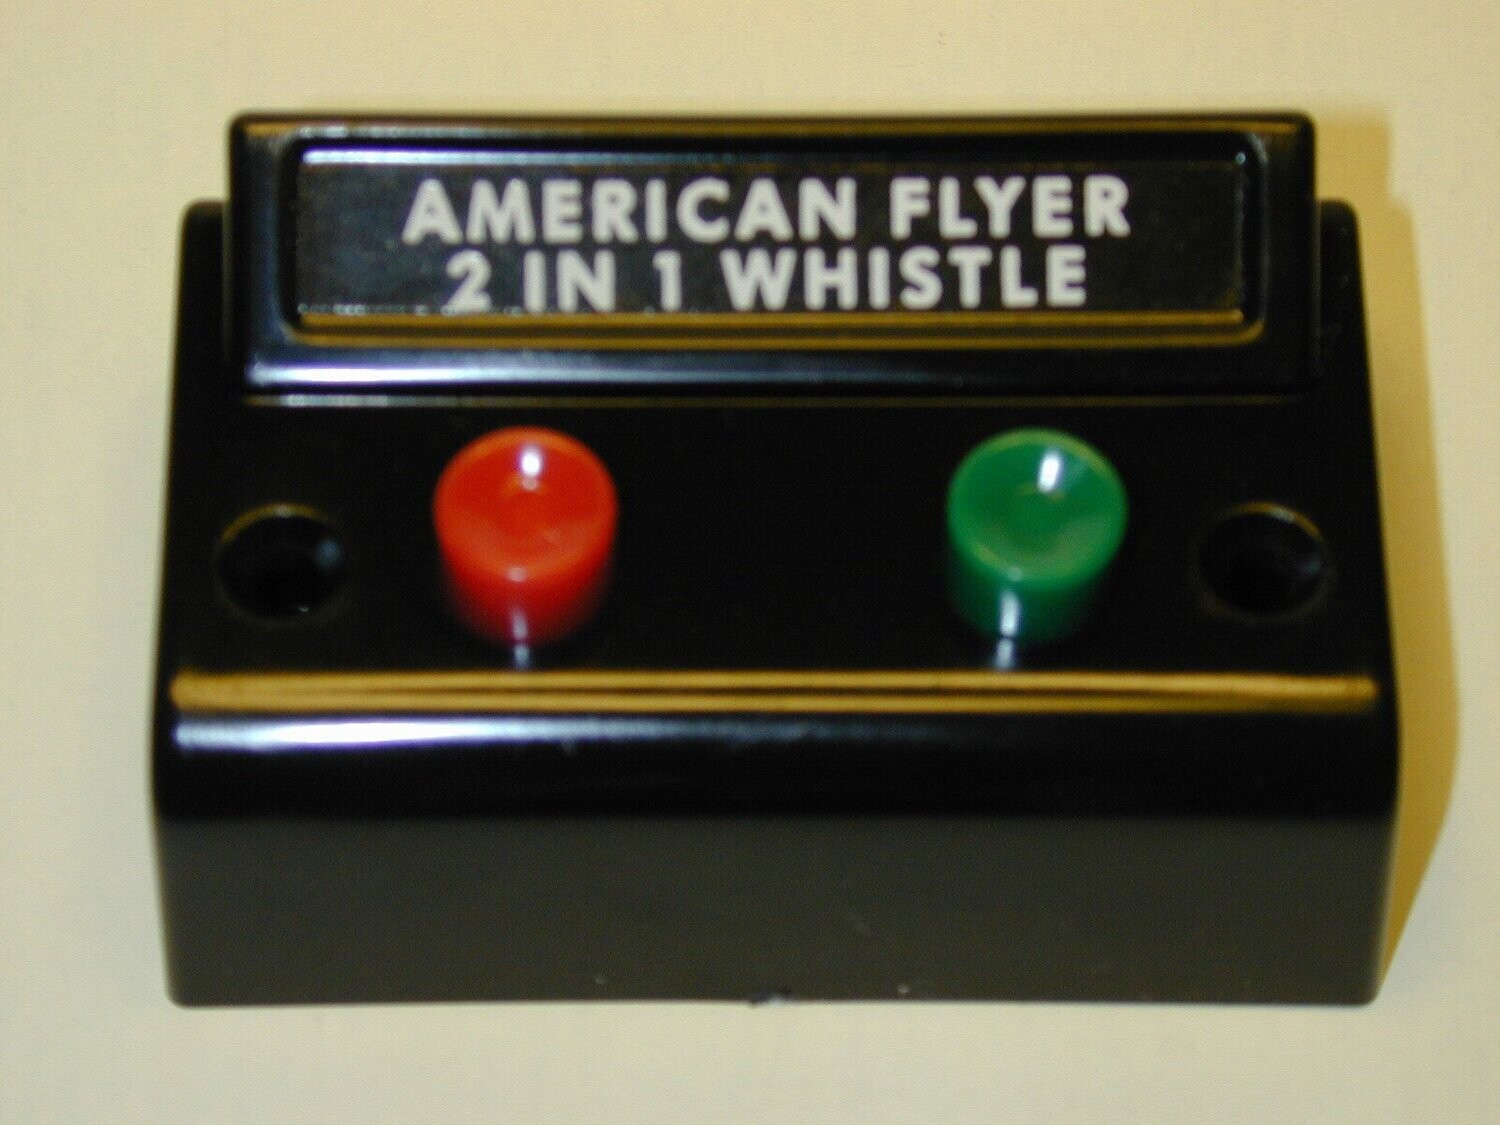 CONTROL-BUTTON, 2-button; for 762 2-IN-1 ERECTOR BILLBOARD WHISTLE